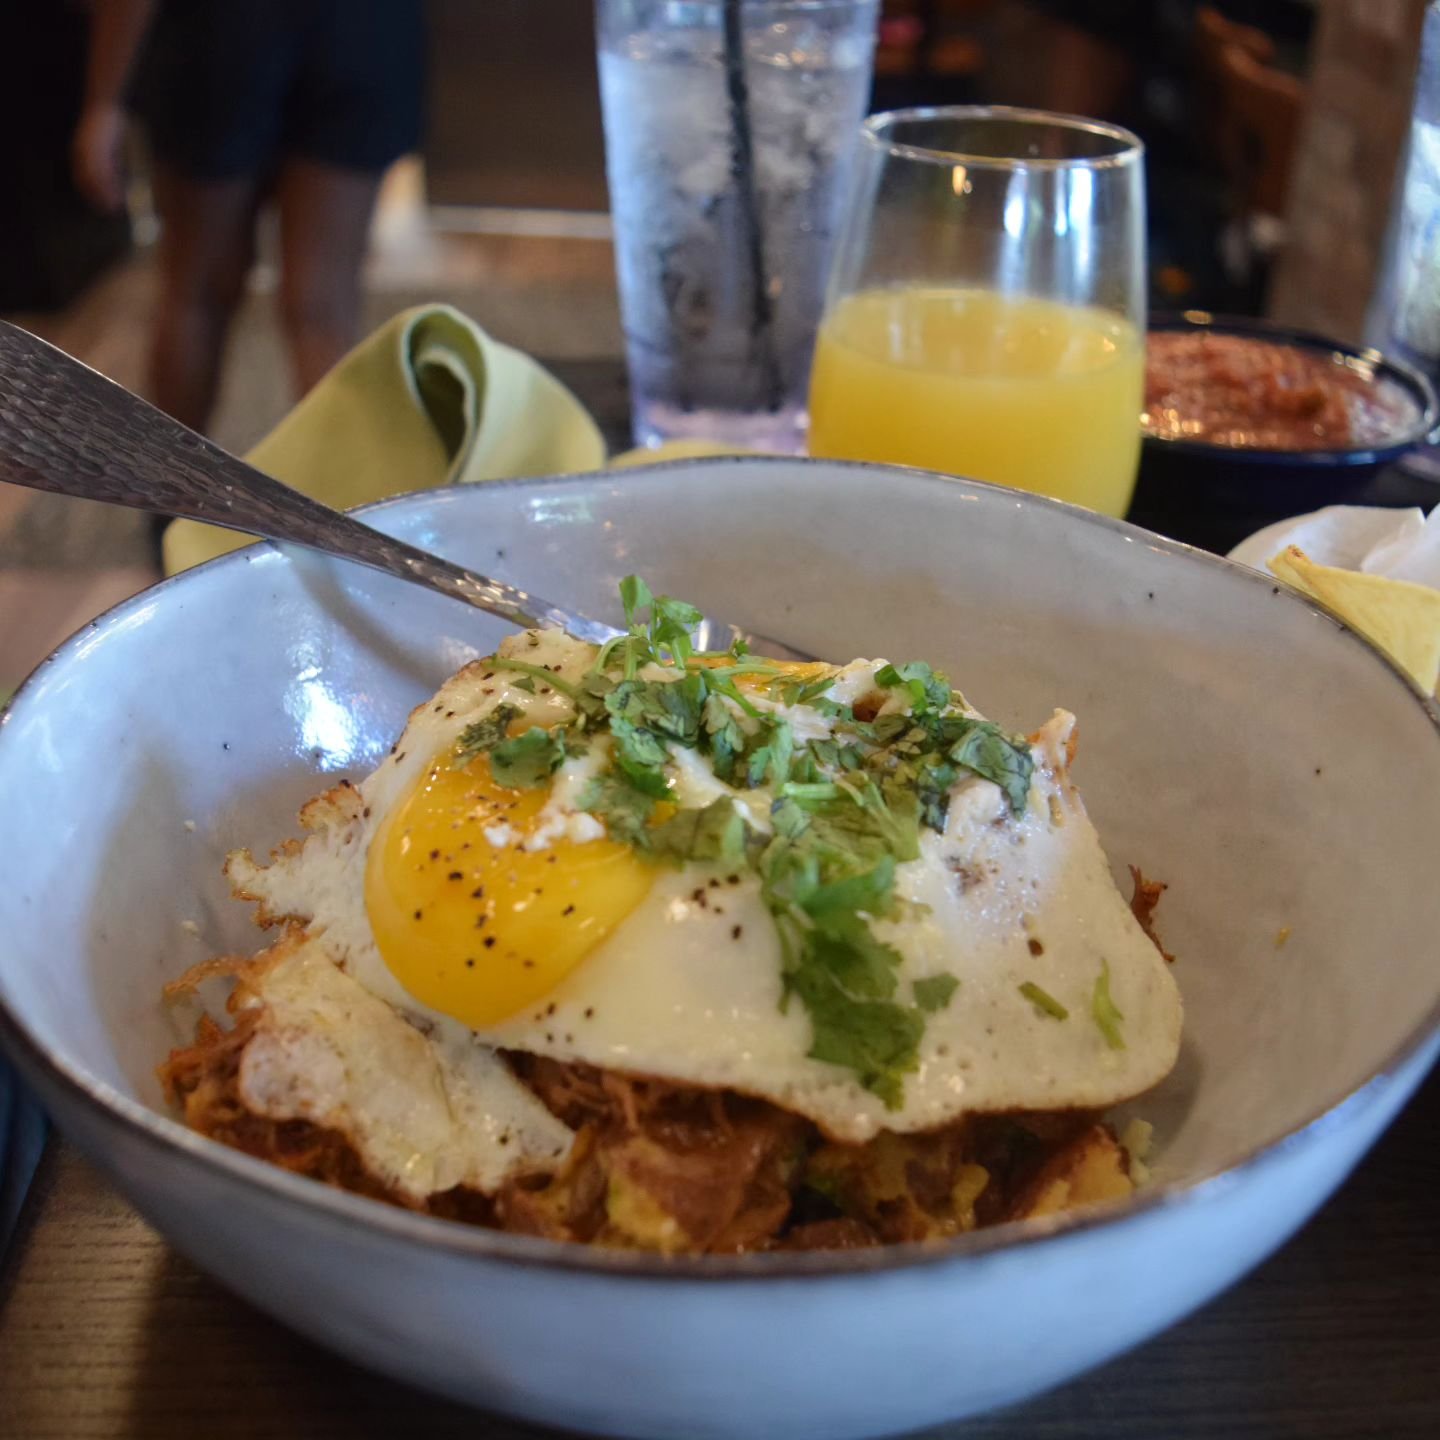 End your weekend on a high note with our delightful brunch offerings and bottomless mimosas!&nbsp;🍹

#SundayFunday #BrunchGoals #BarrioKC